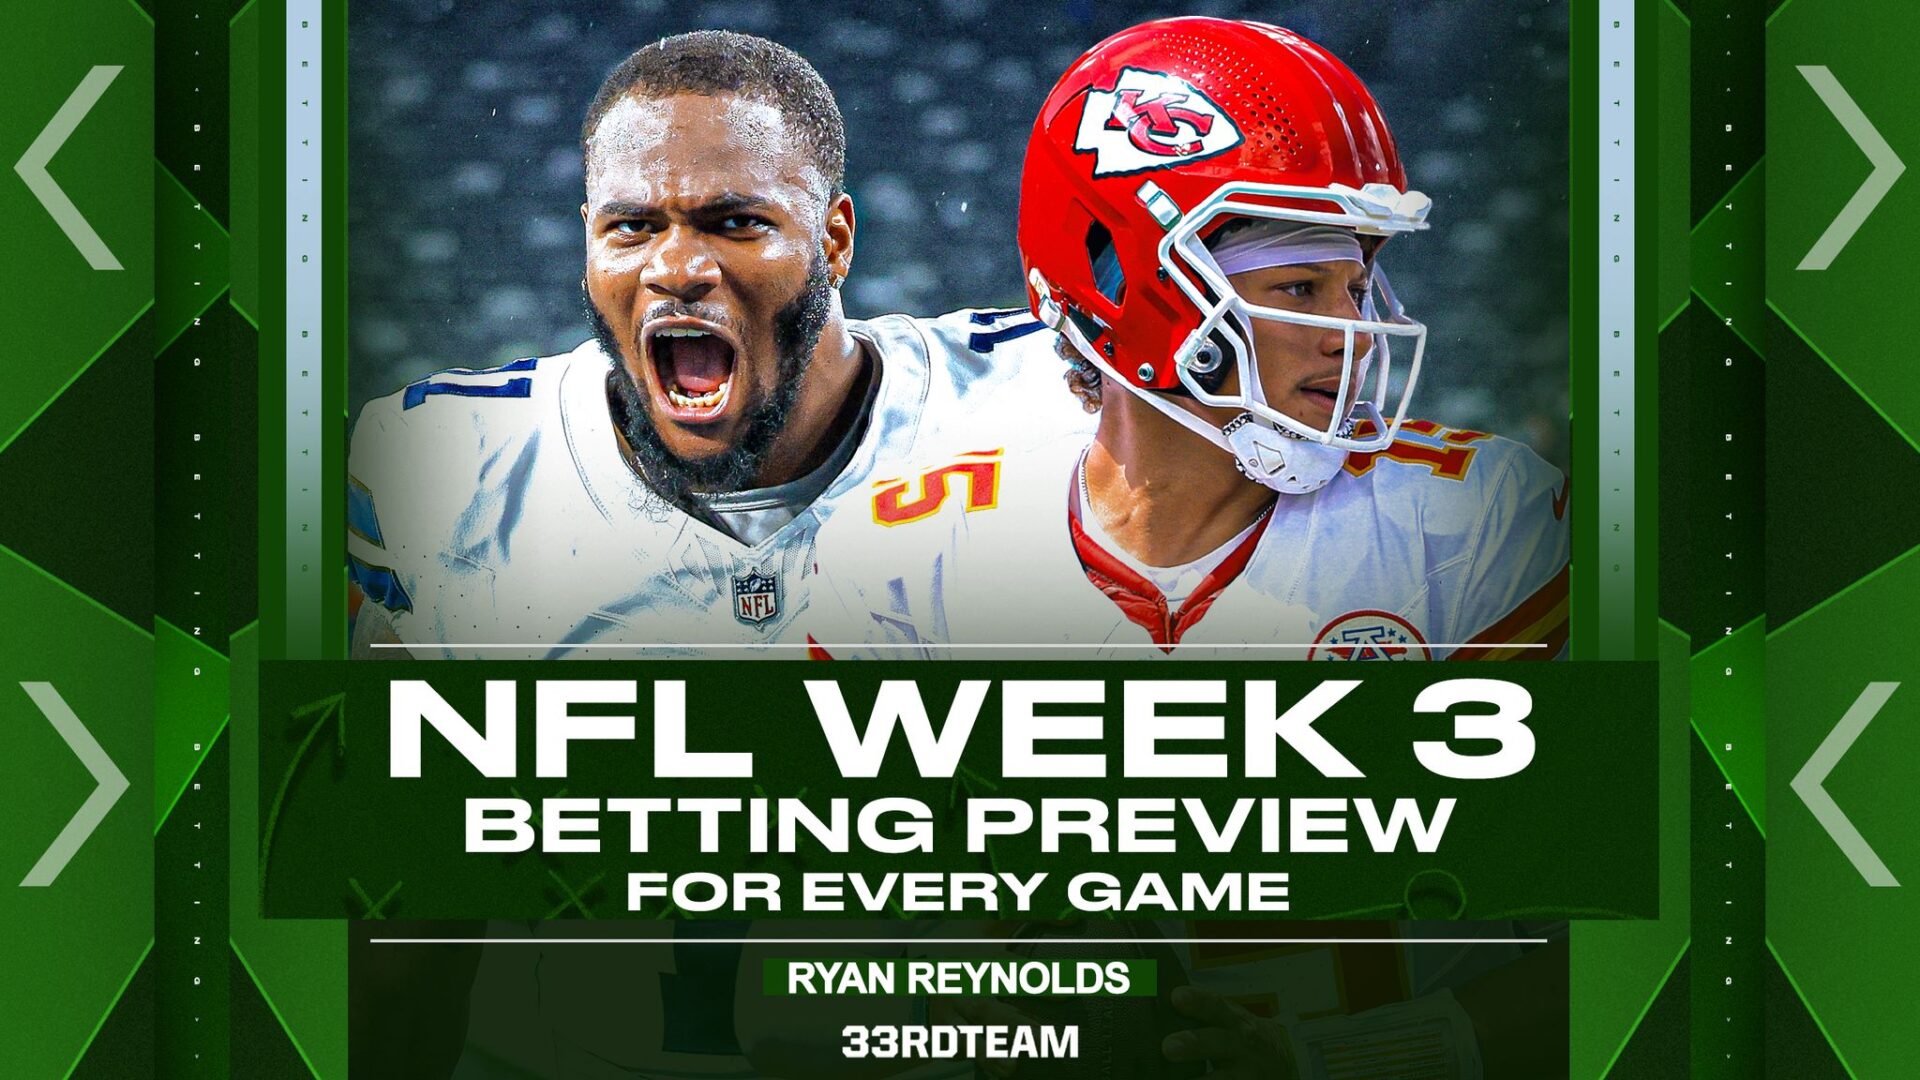 NFL Week 3 picks, point spreads, betting lines for every game: Who